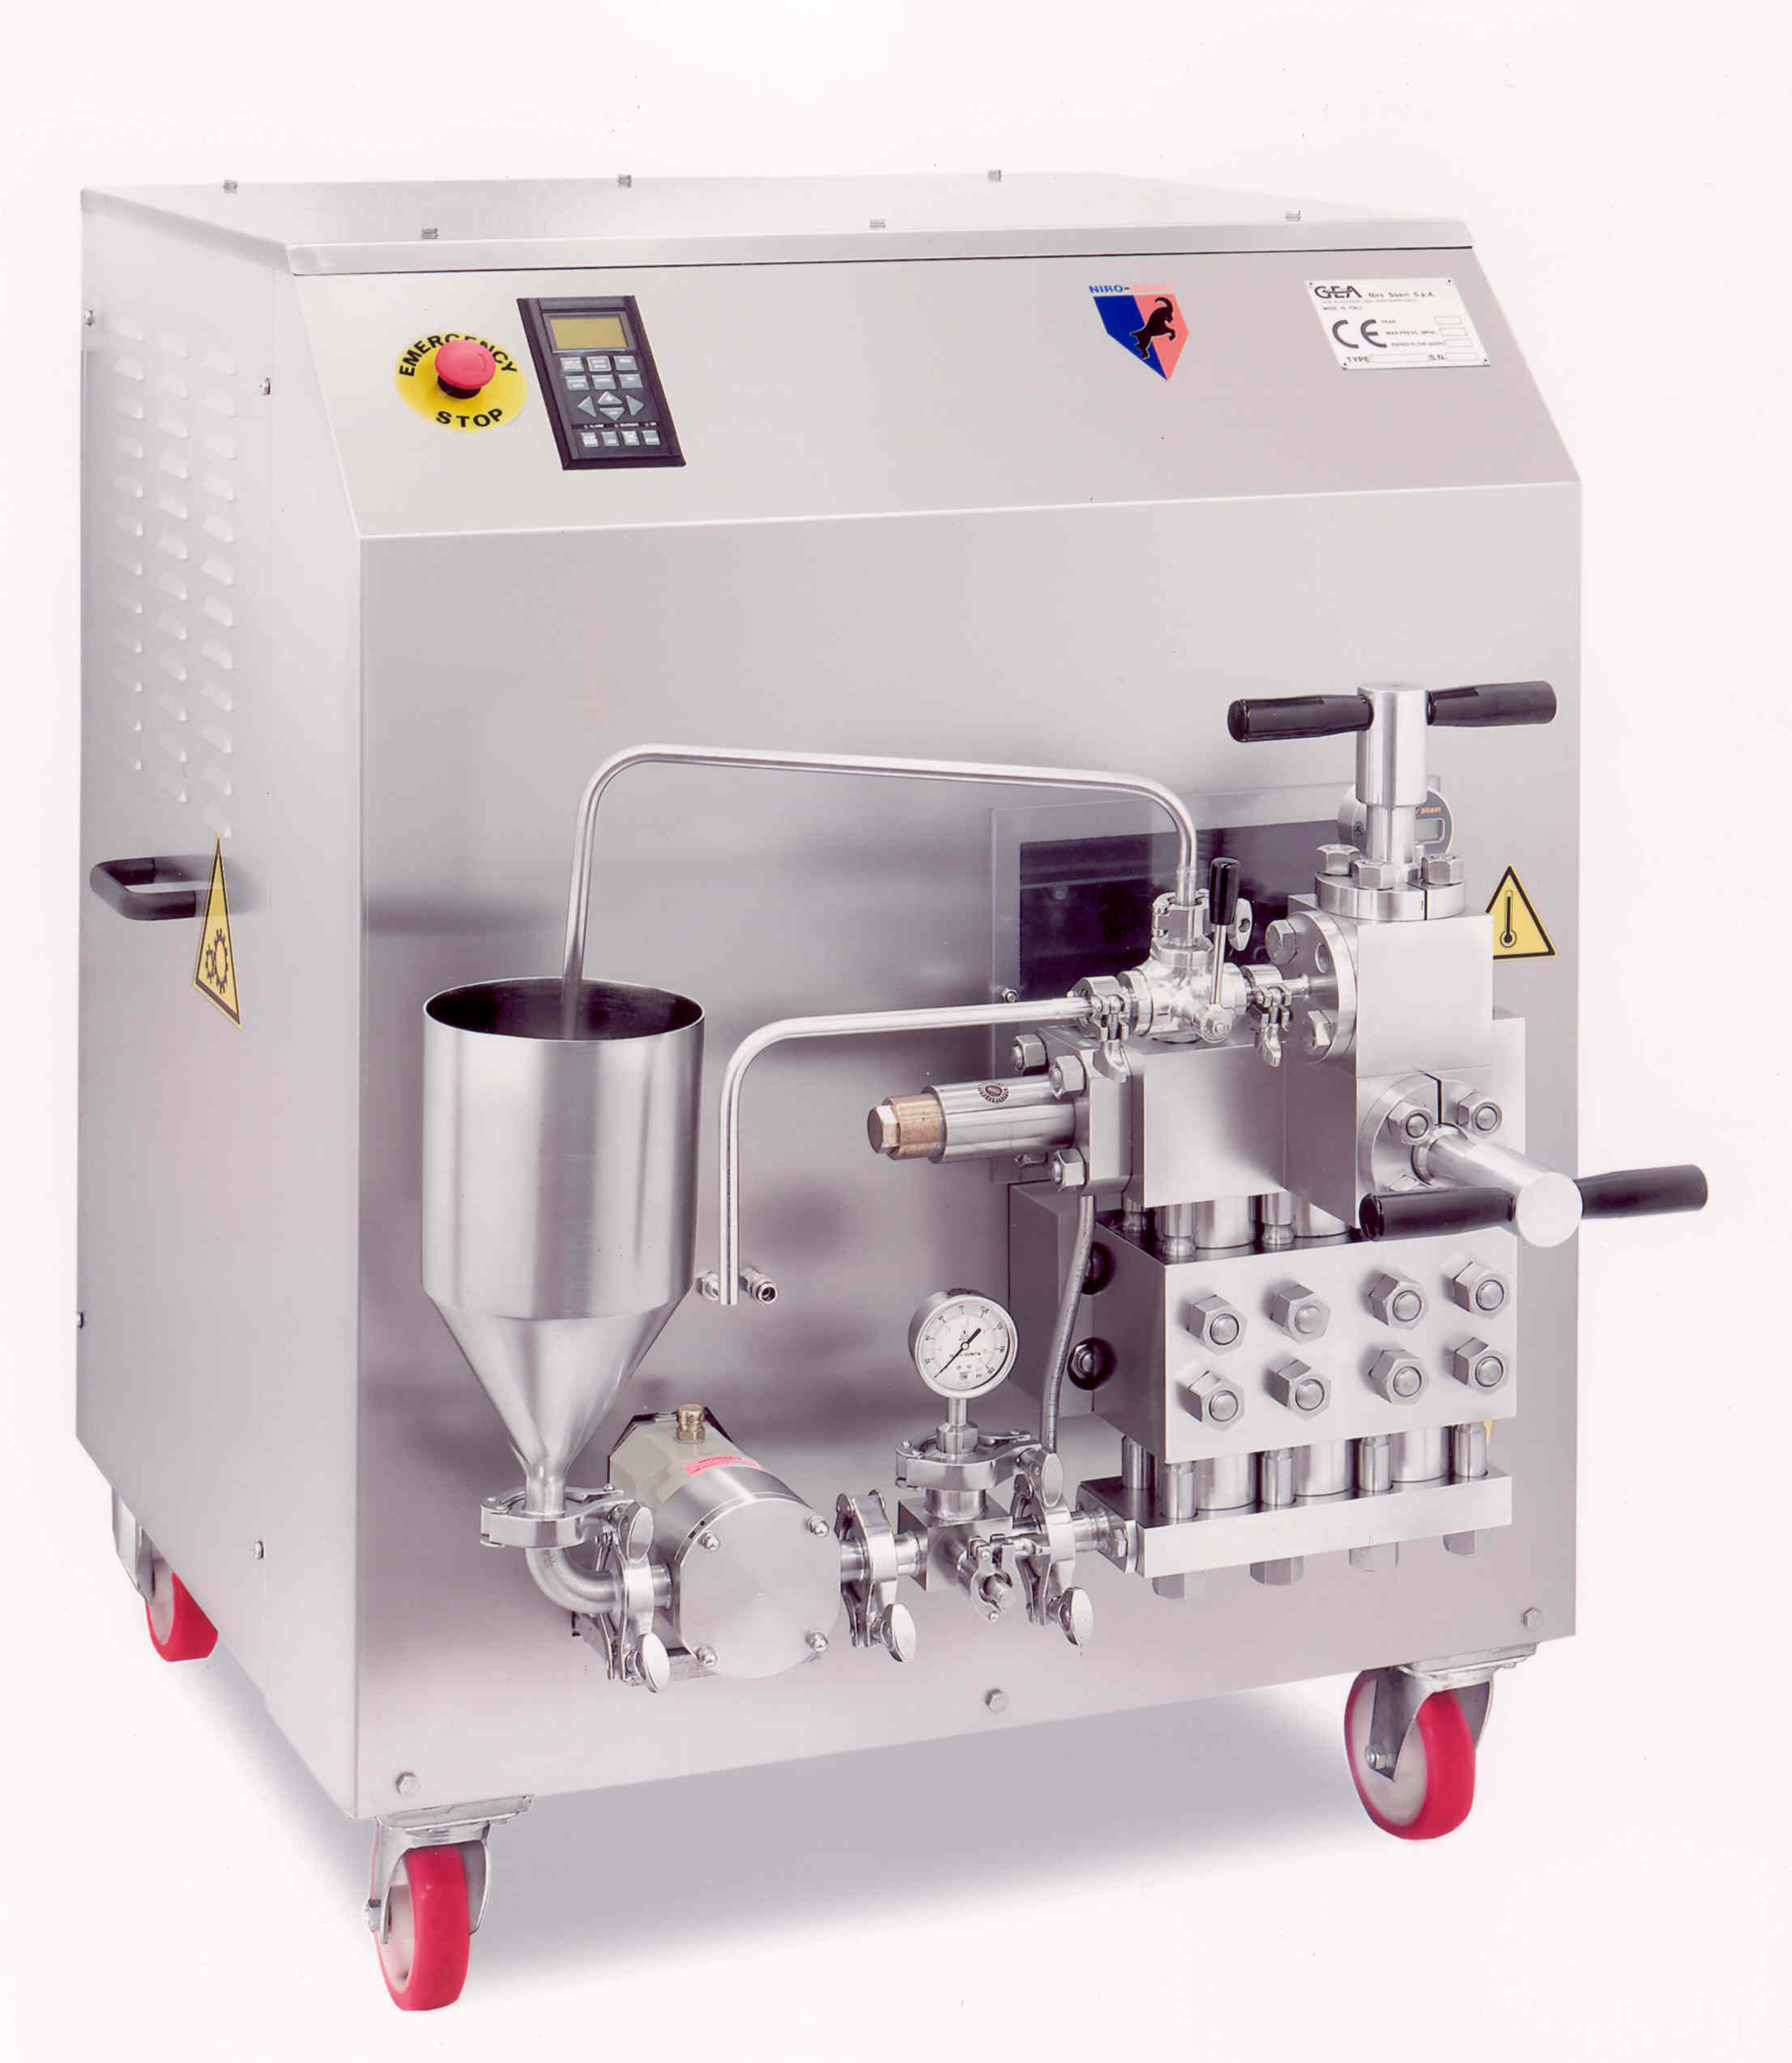 GEA Panther™ NS3006L pilot high pressure homogenizer unit designed for continuous operation up to 1500 bar and for limited productions.